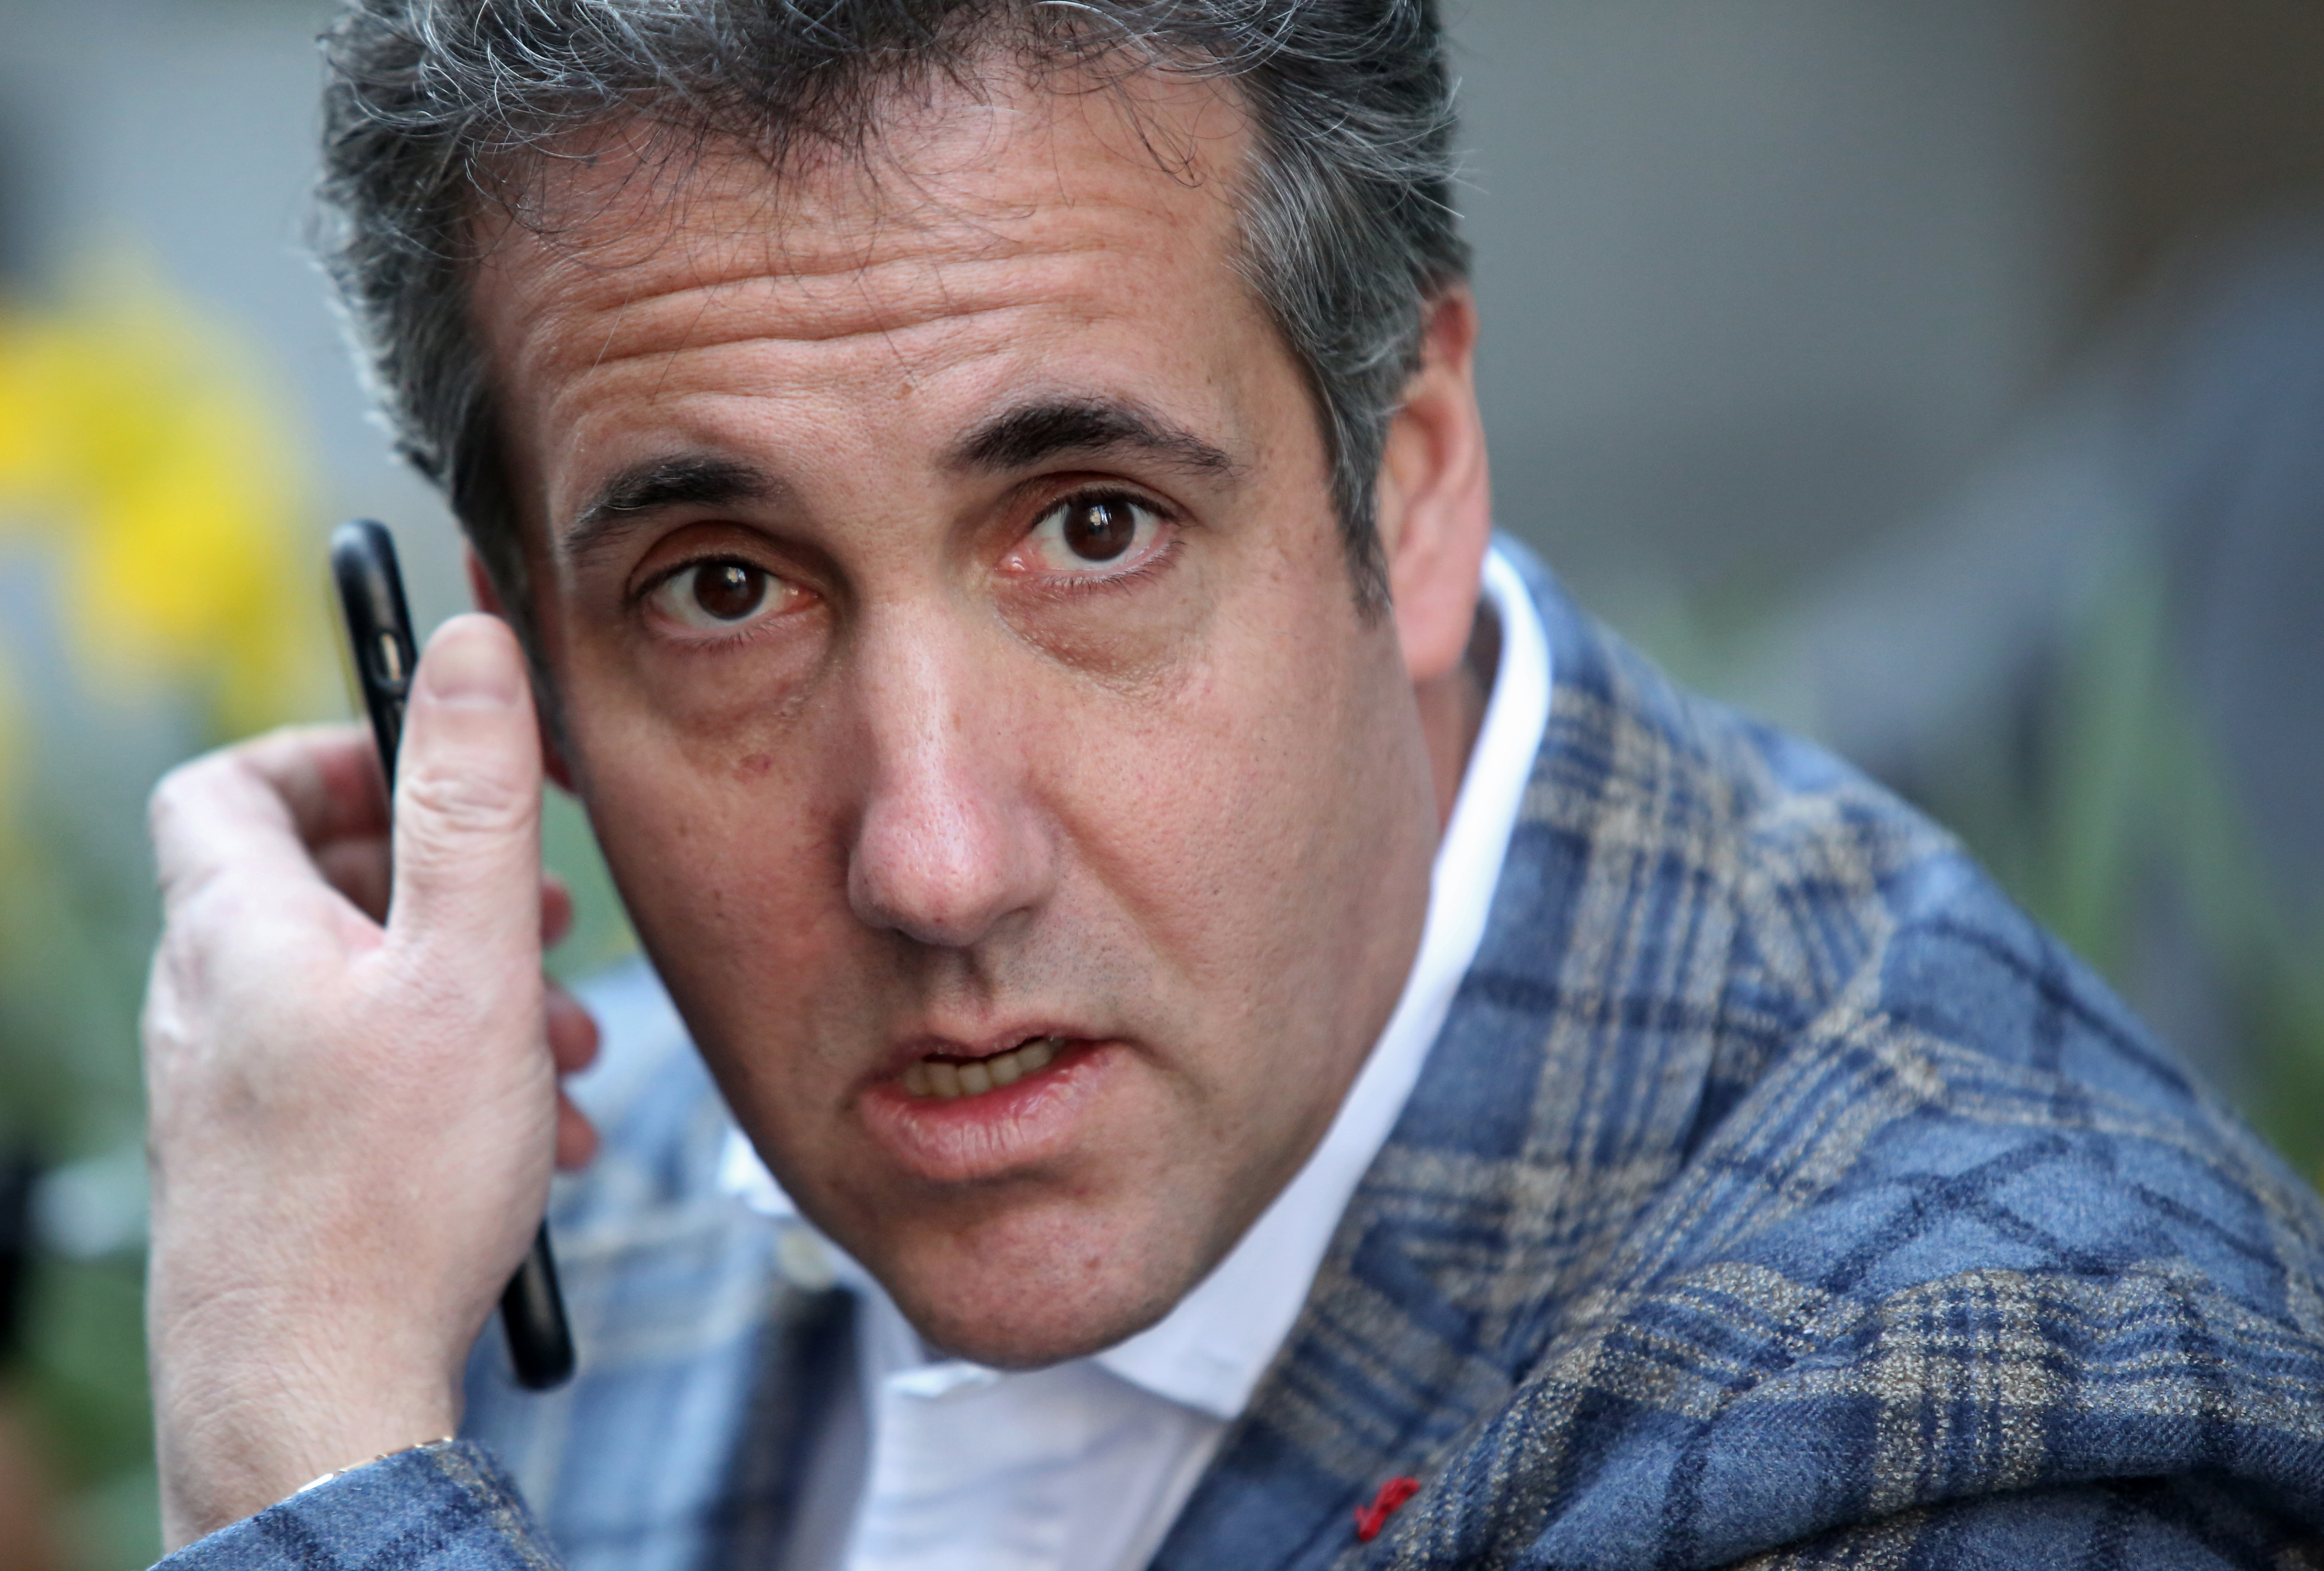 NEW YORK, NY - APRIL 13: Michael Cohen, President Donald Trump's attorney, takes a phone call near the Loews Regency hotel on Park Ave on April 13, 2018 in New York City. Following FBI raids on his home, office and hotel room, the Department of Justice announced that they are placing him under criminal investigation. (Photo by Yana Paskova/Getty Images)